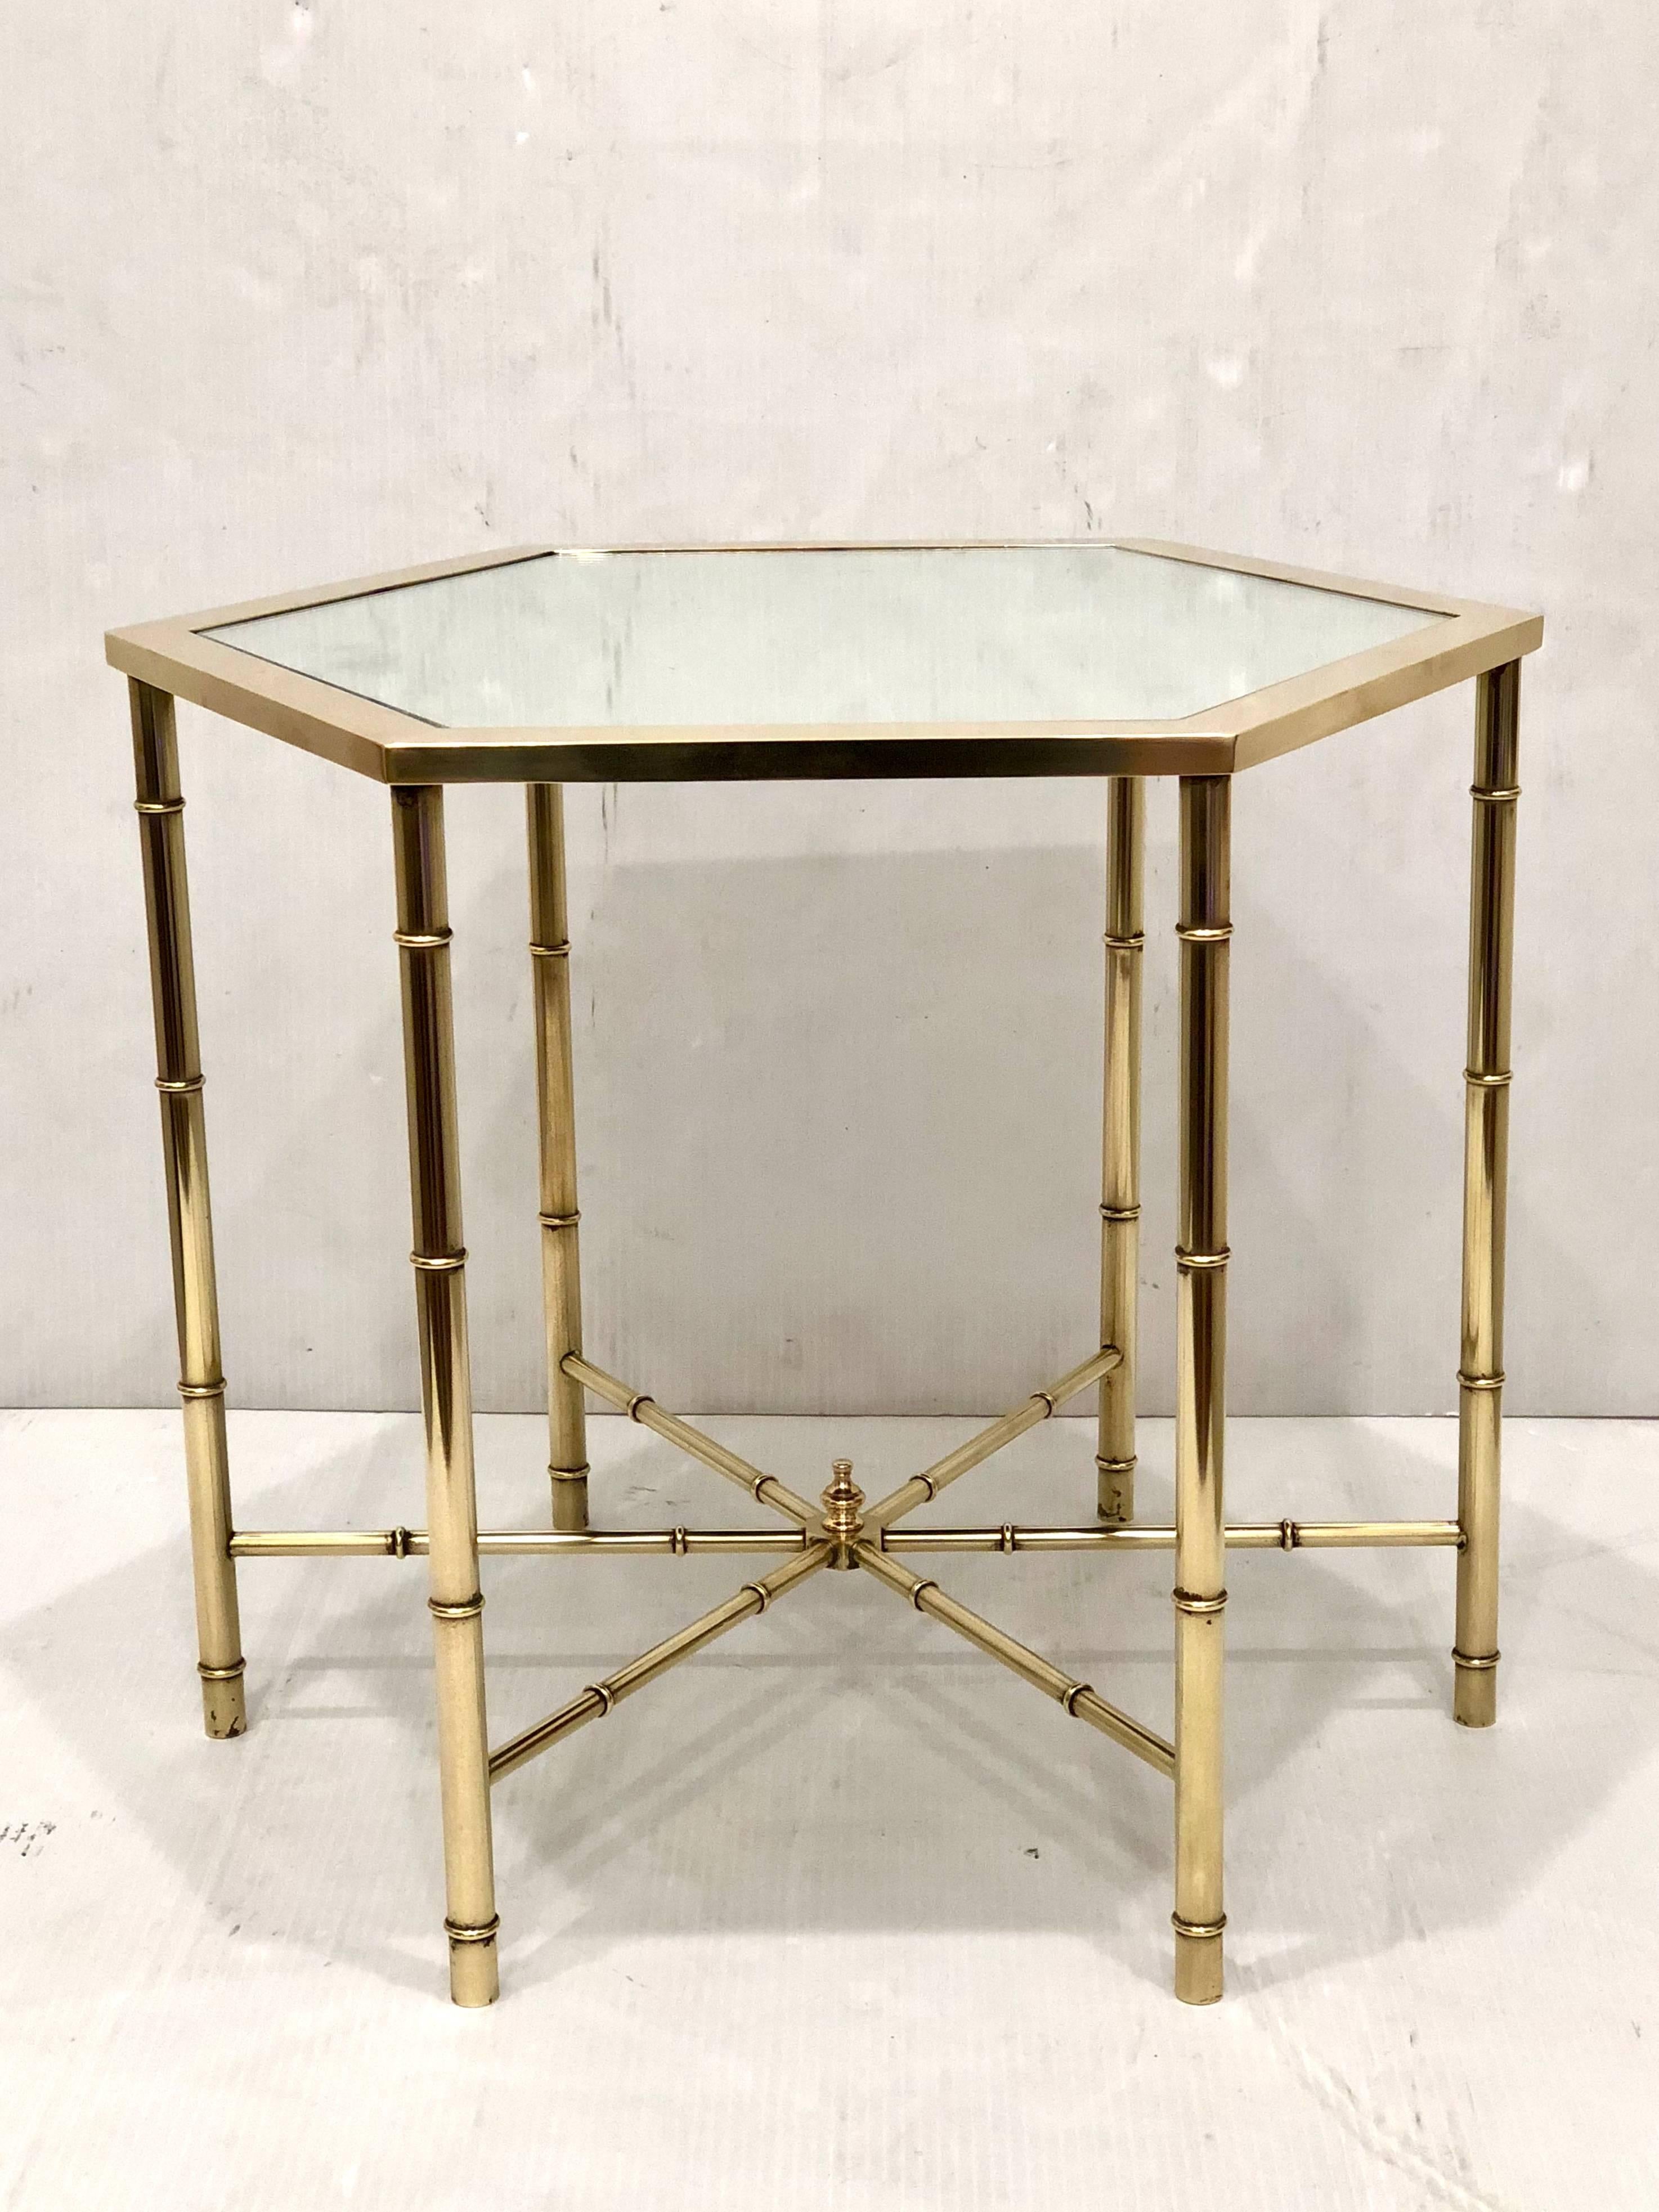 Elegant pair of freshly polished brass hexagonal cocktail of end tables, with new mirrored tops striking, versatile and unique.